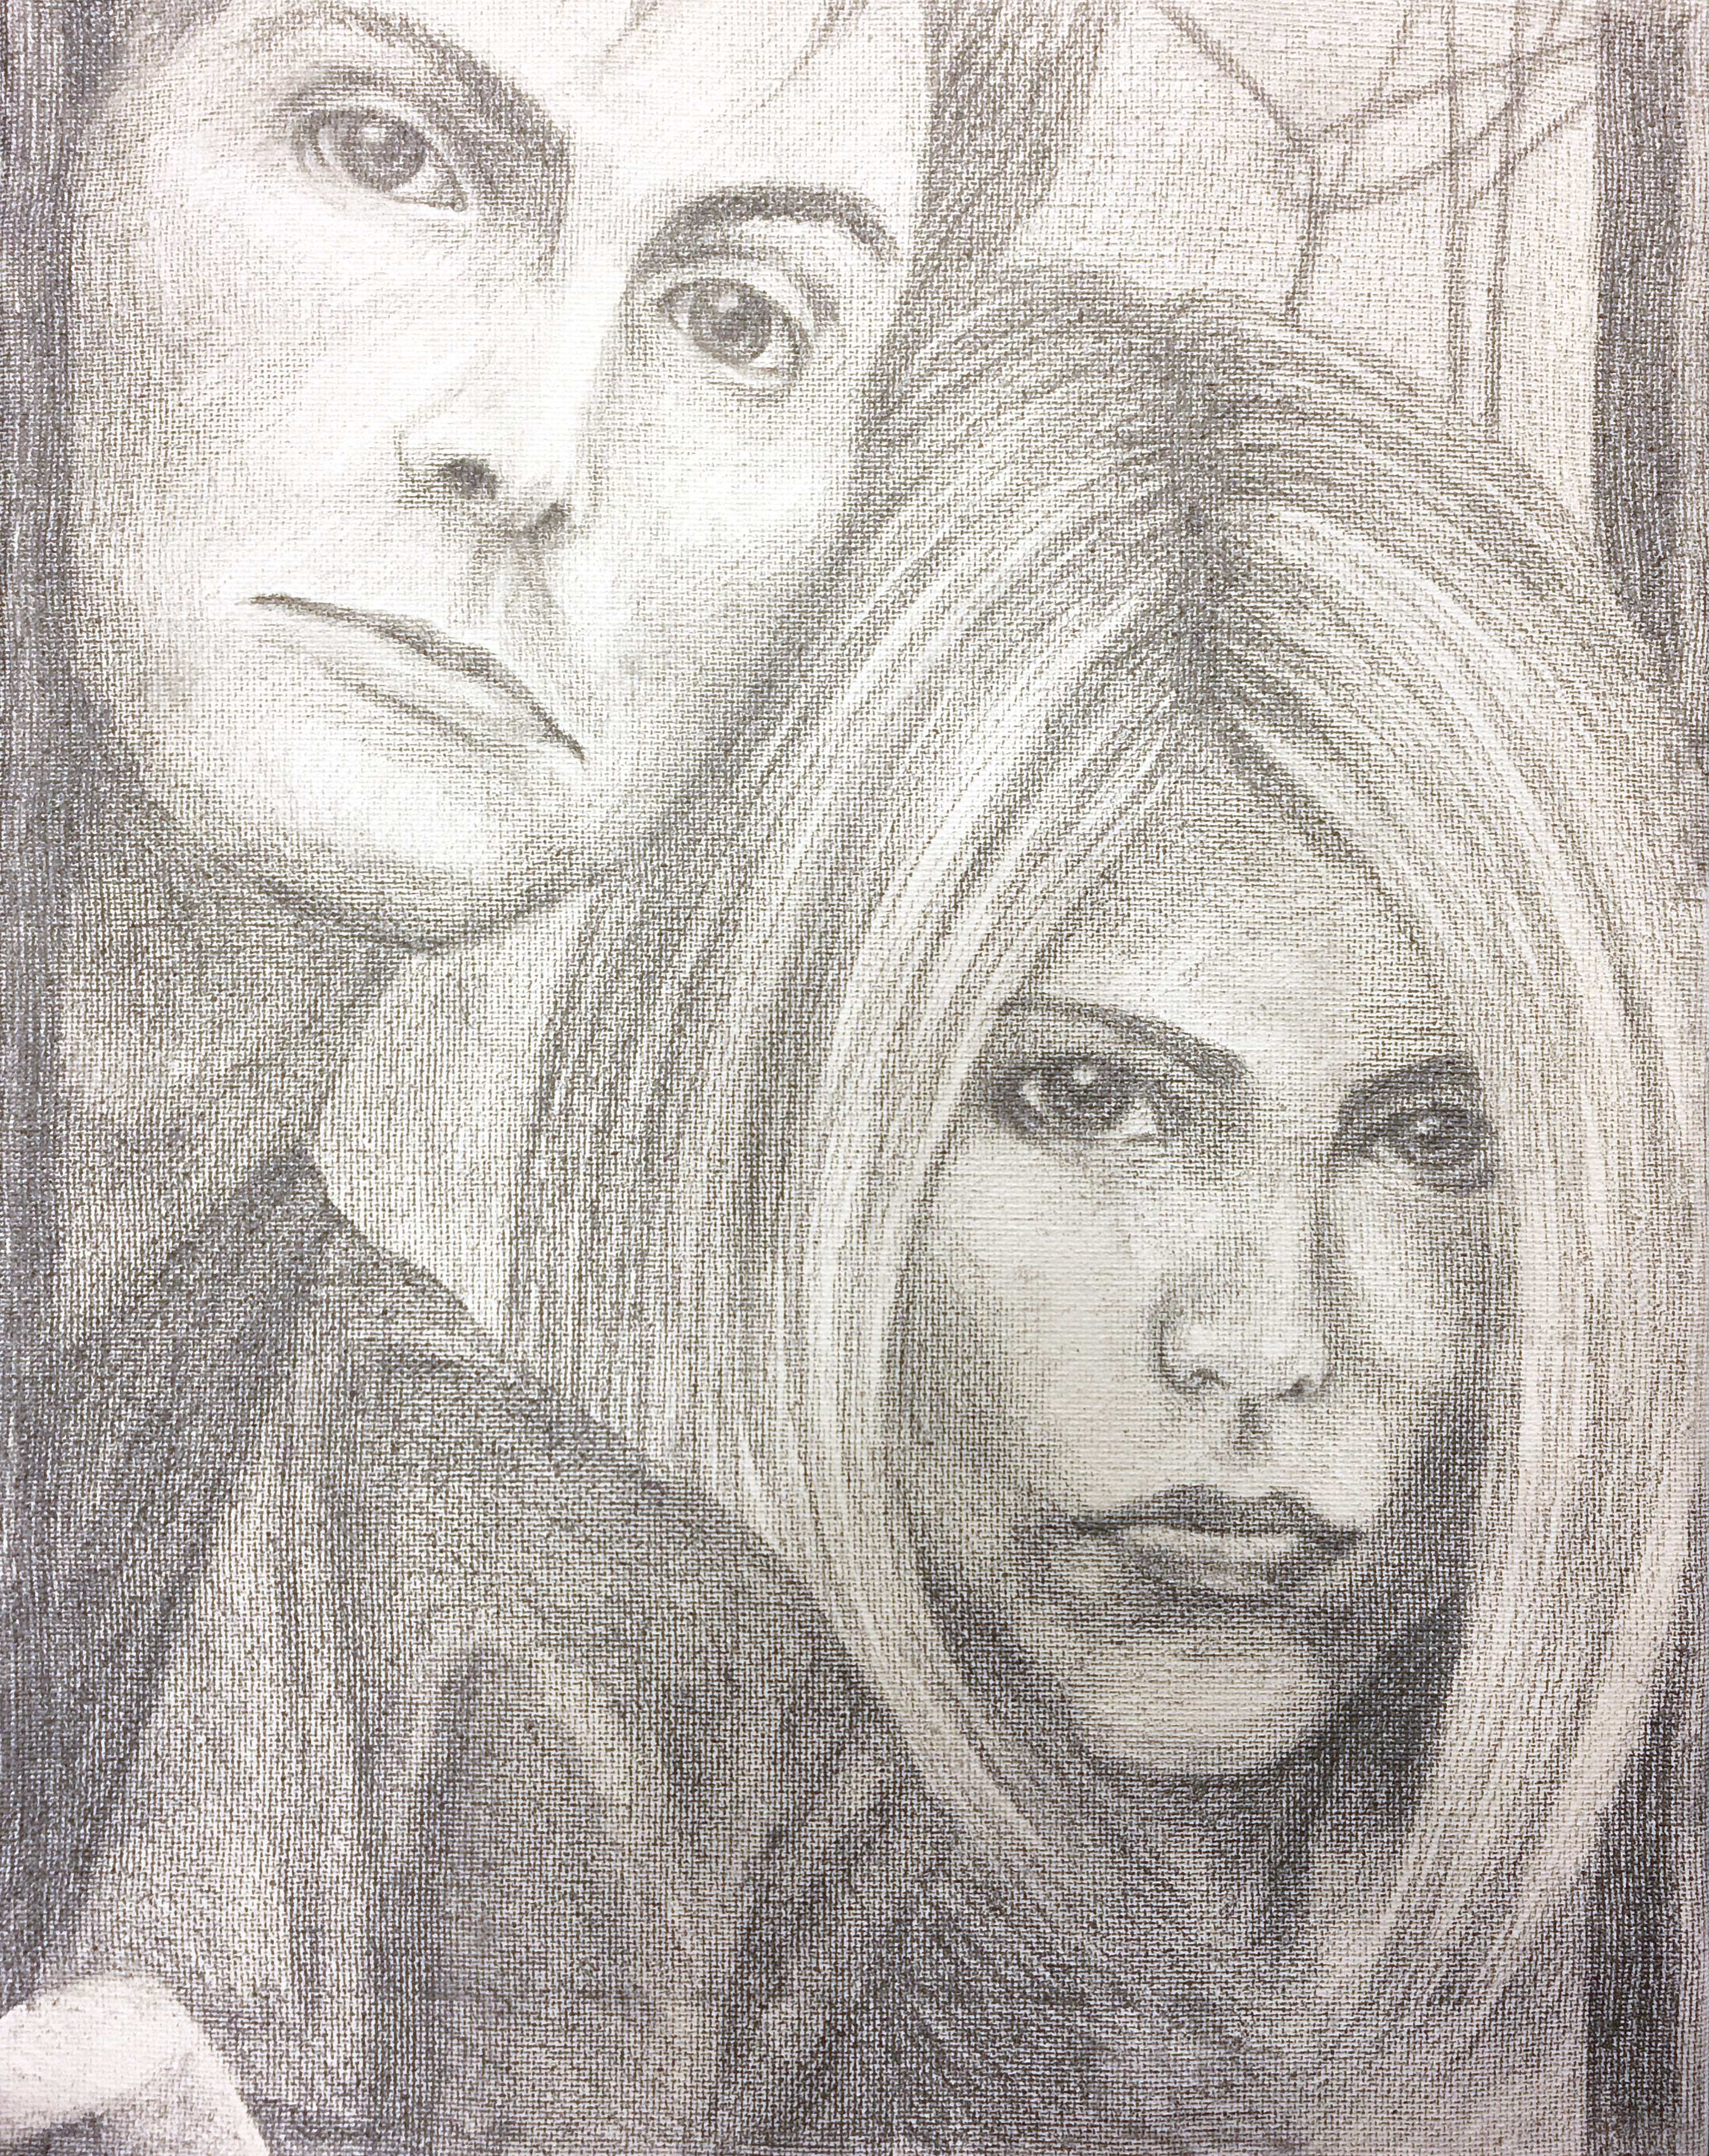 Close up portrait of Doctor Who as portrayed by David Tennant and Rose as portrayed by Billie Piper